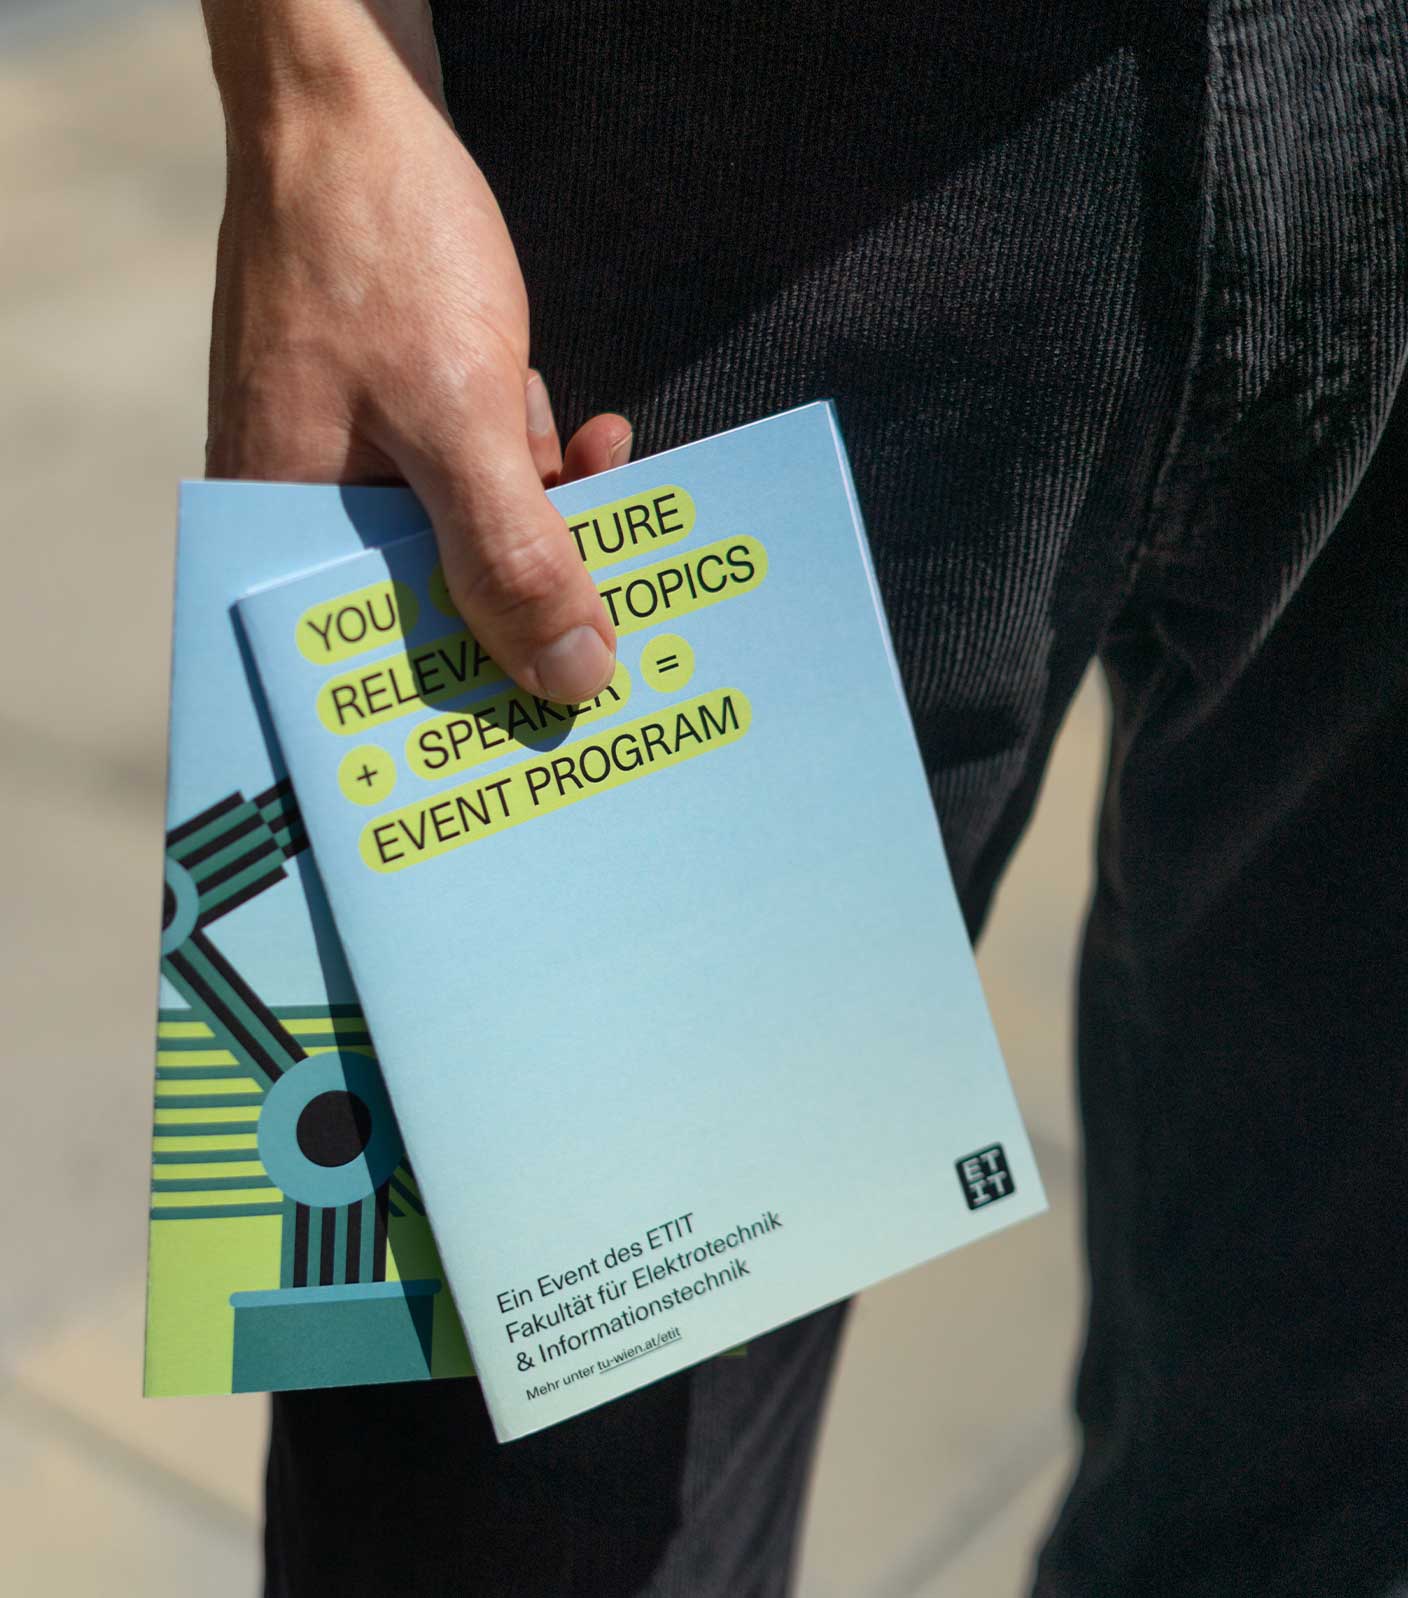 A photo of a person holding two brochures of the ETIT near their paints showing a cover with an equation title and the logo and the other brochure cover showing a vector illustration of a robotic arm, all in the neon green-yellow, green, light-blue and black color scheme.